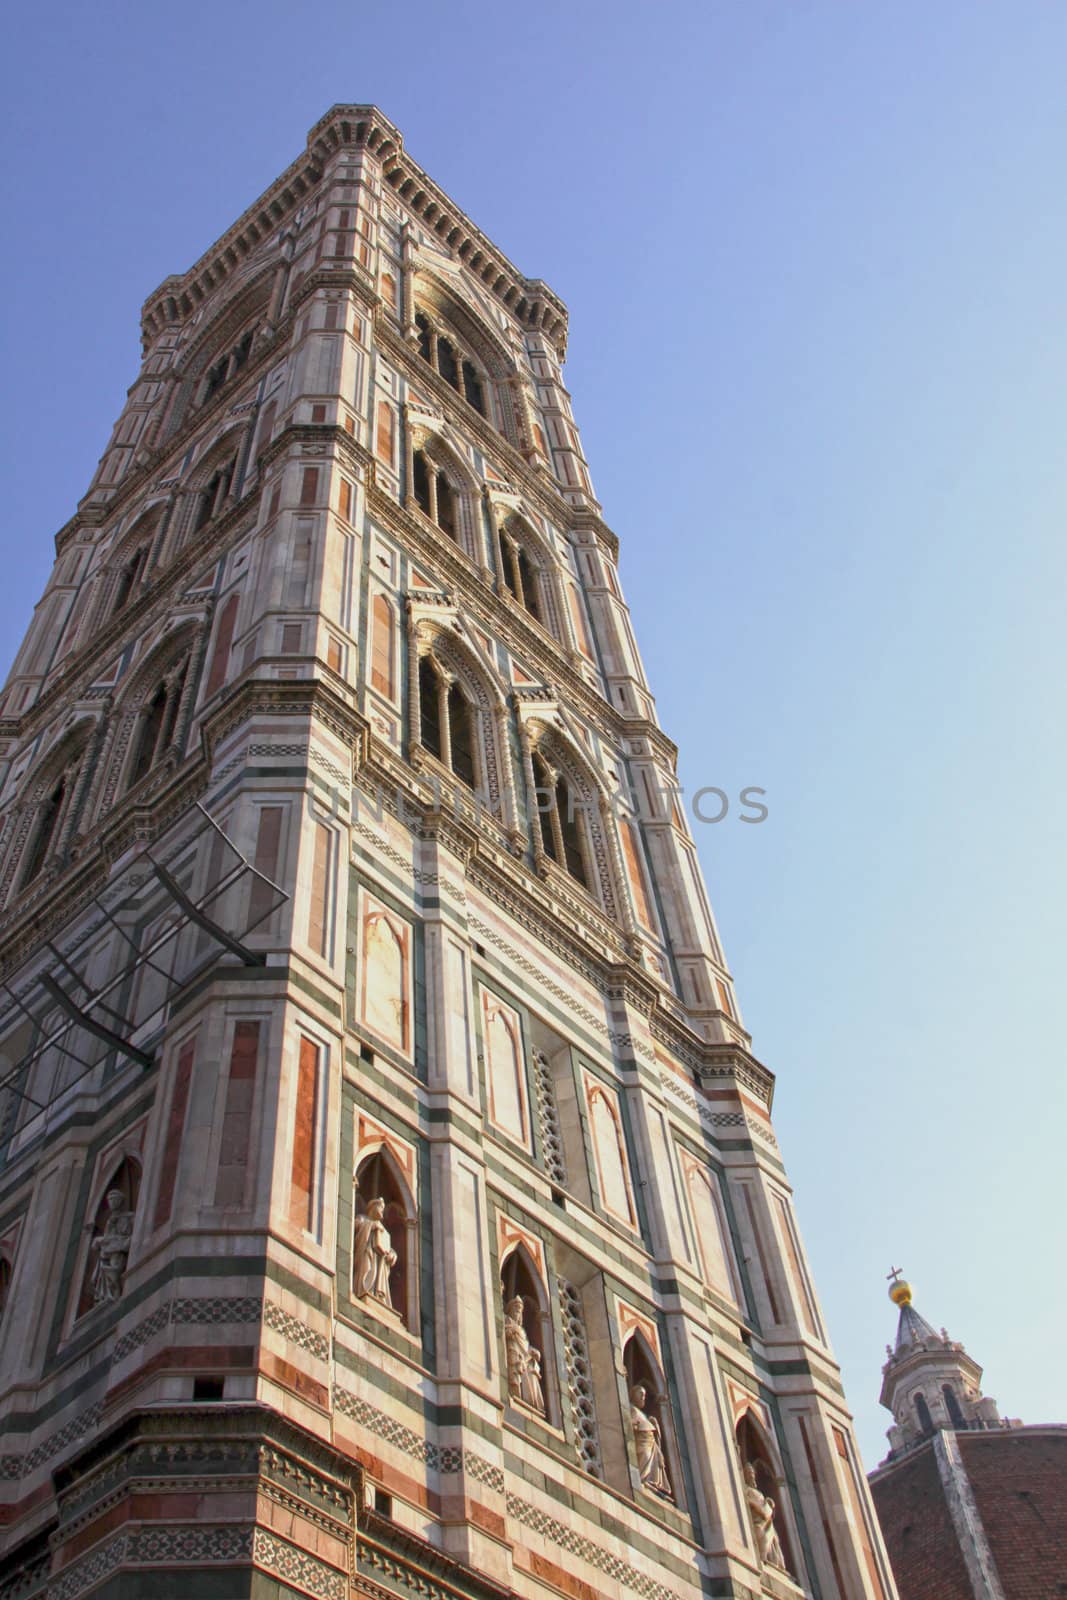 Giotto's Campanile, shot in Florence, Italy.  The bell tower was completed in 1359.